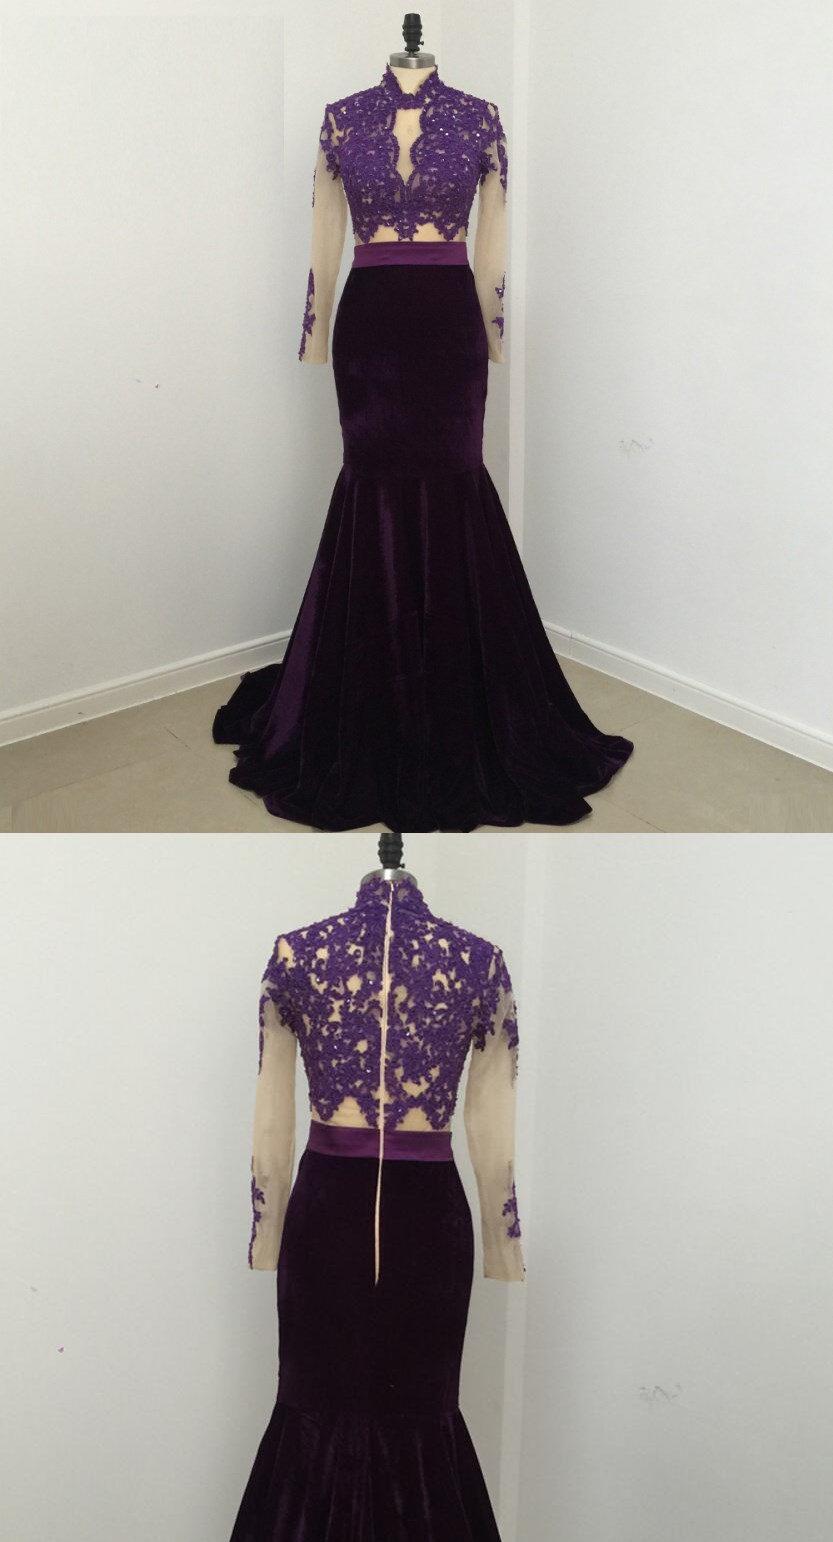 Elegant Sexy Mermaid Lace Velvet Evening Dresses 2018 Party High Neck Long Sleeve Sweep Train 2 Pieces African Purple Prom Dress